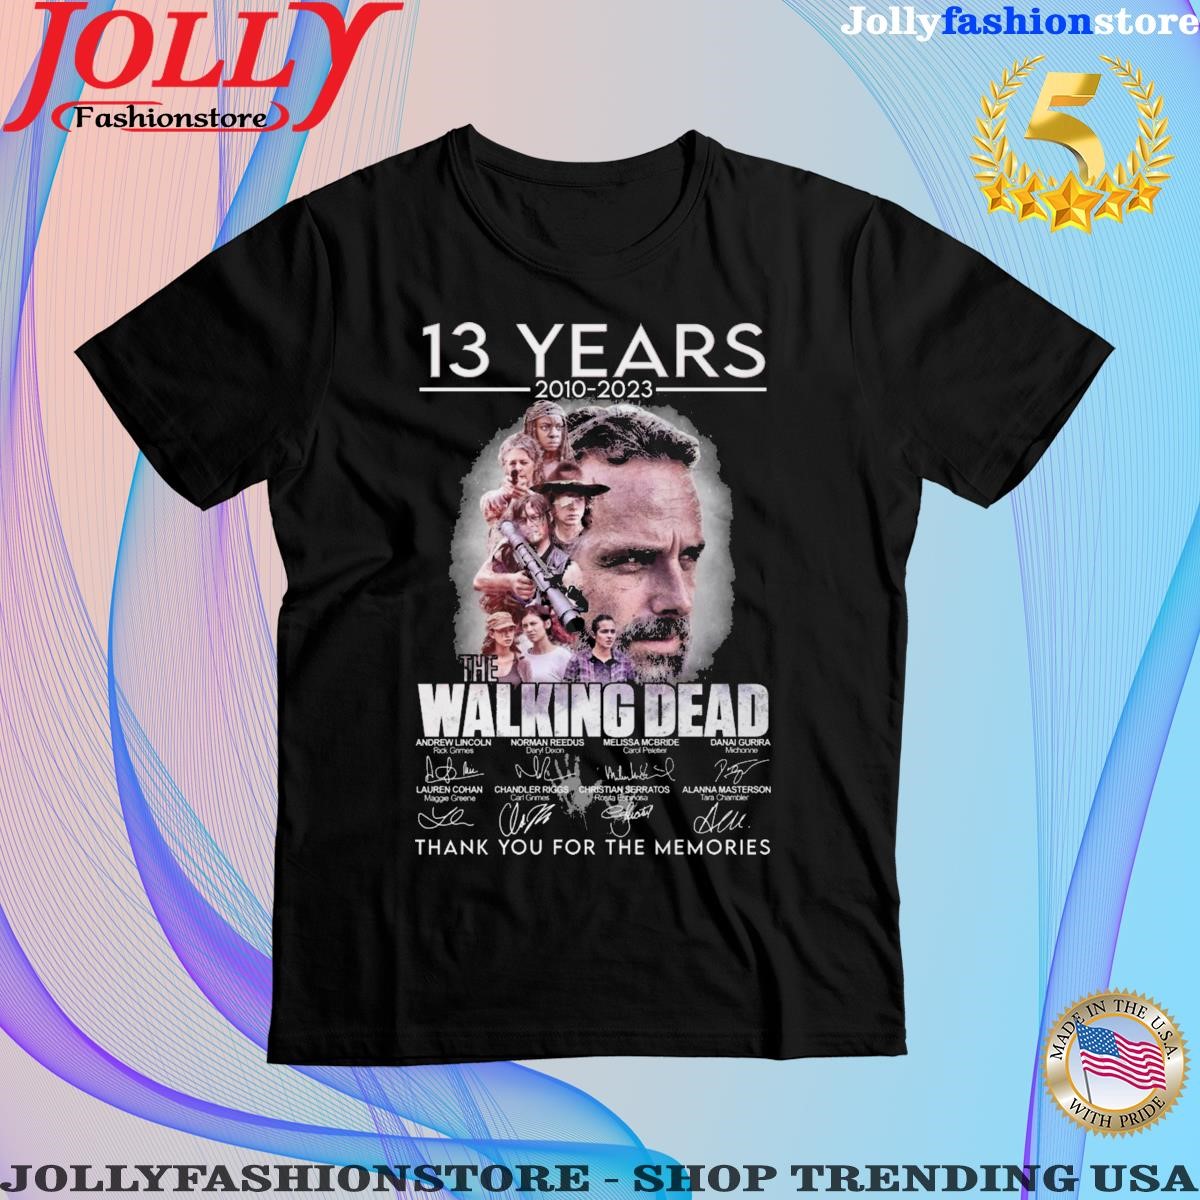 13 years 2010 2023 the walking dead thank you for the memories signatures shirt